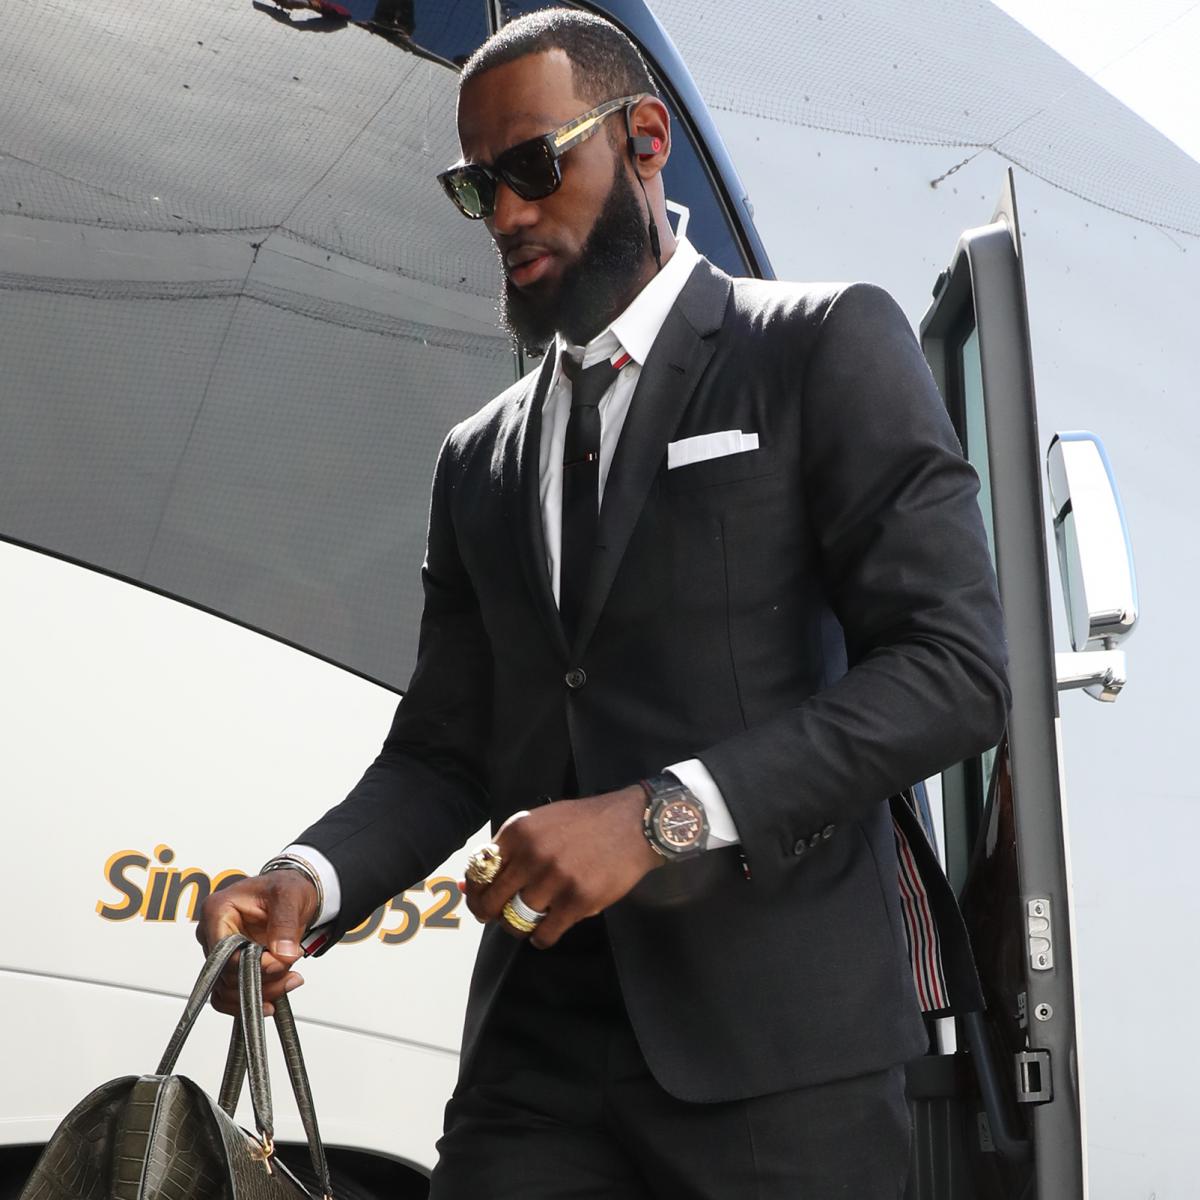 LeBron James' Infamous Finals Game 1 Outfit with Shorts Worth More